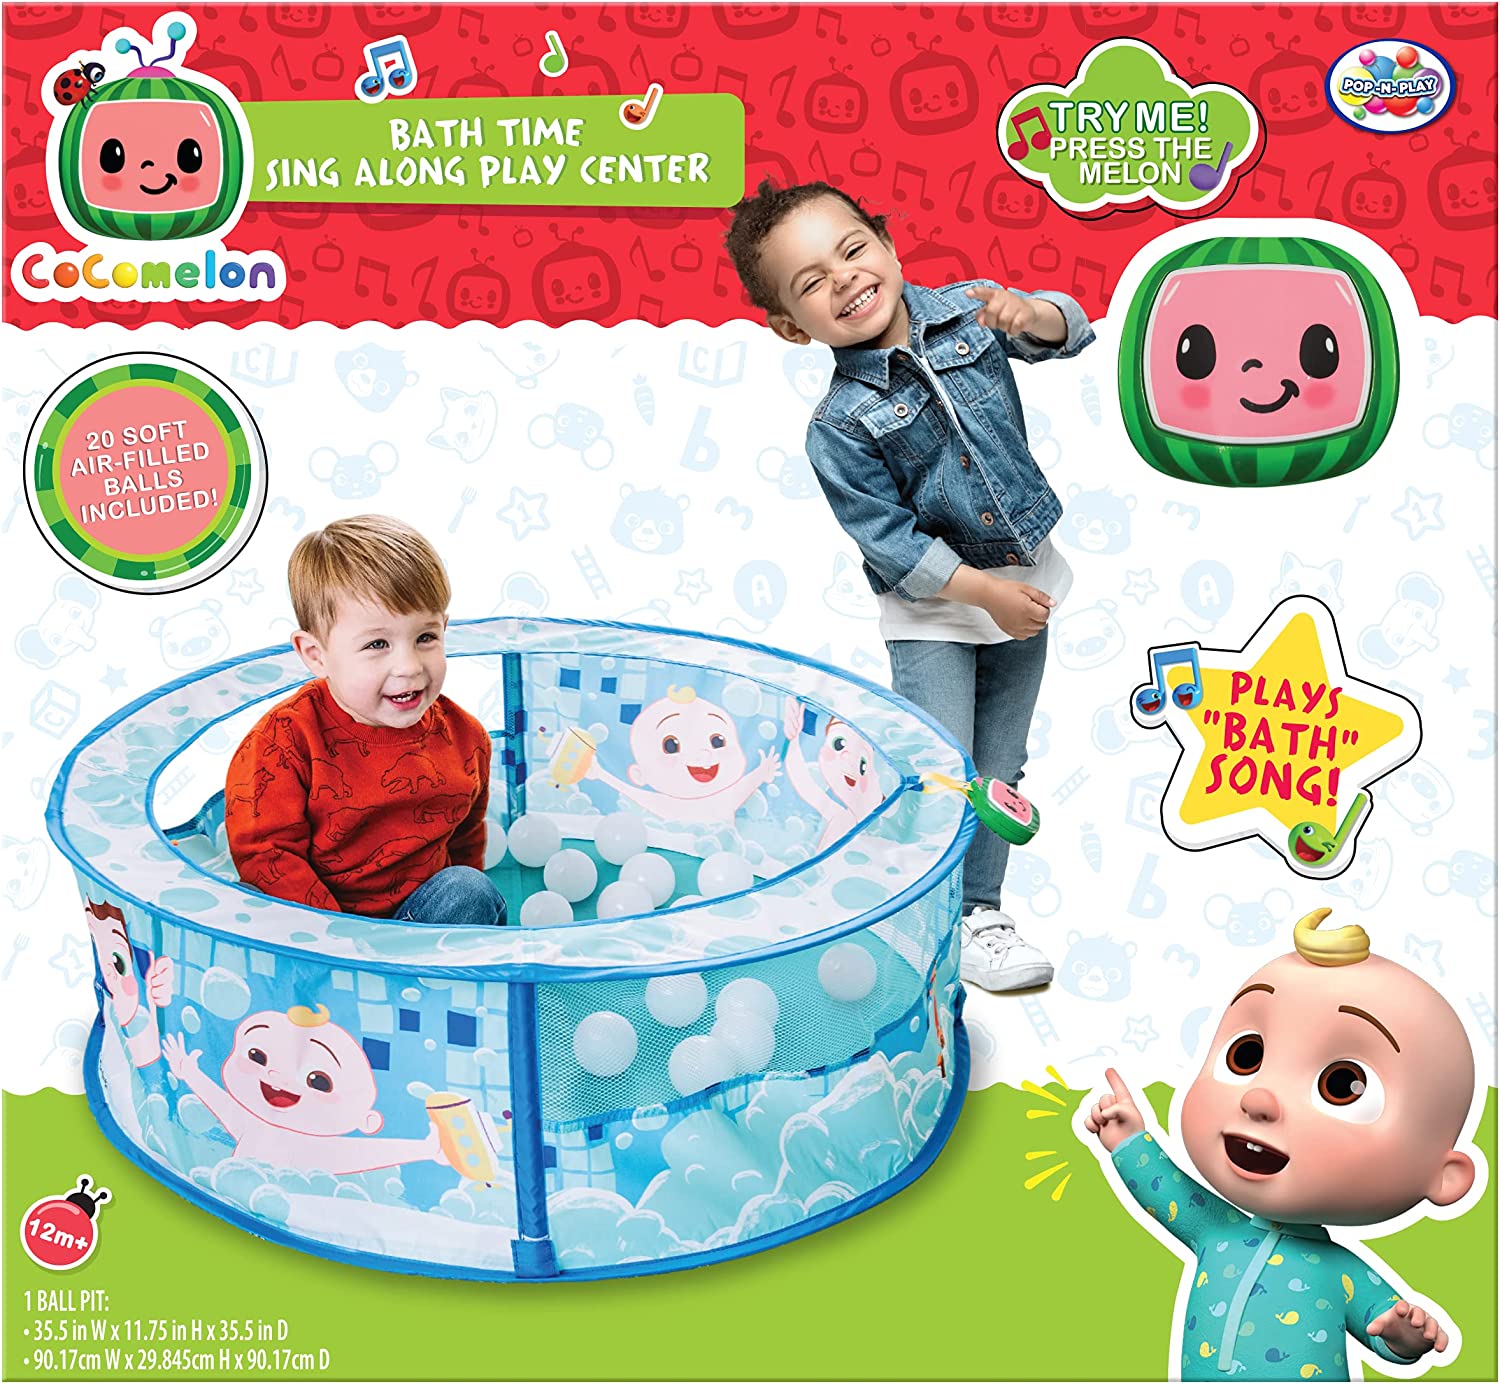 CoComelon Bath Time Sing Along Musical Ball Pit w/ 20 Play Balls $9.25 + FS w/ Amazon Prime or on $25+